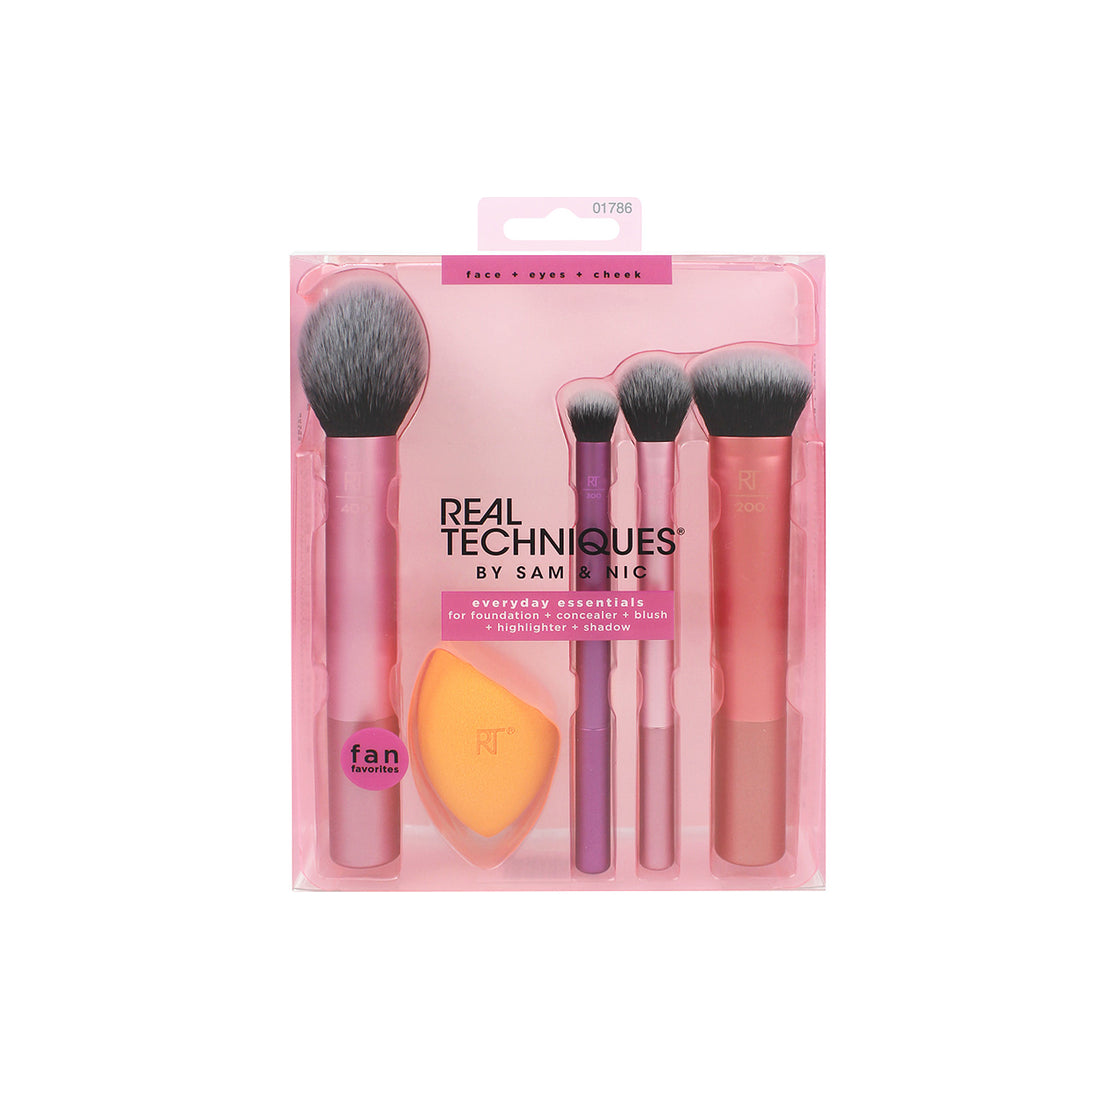 Real Techniques Set Of 4 Brushes + Everyday Essentials Sponte